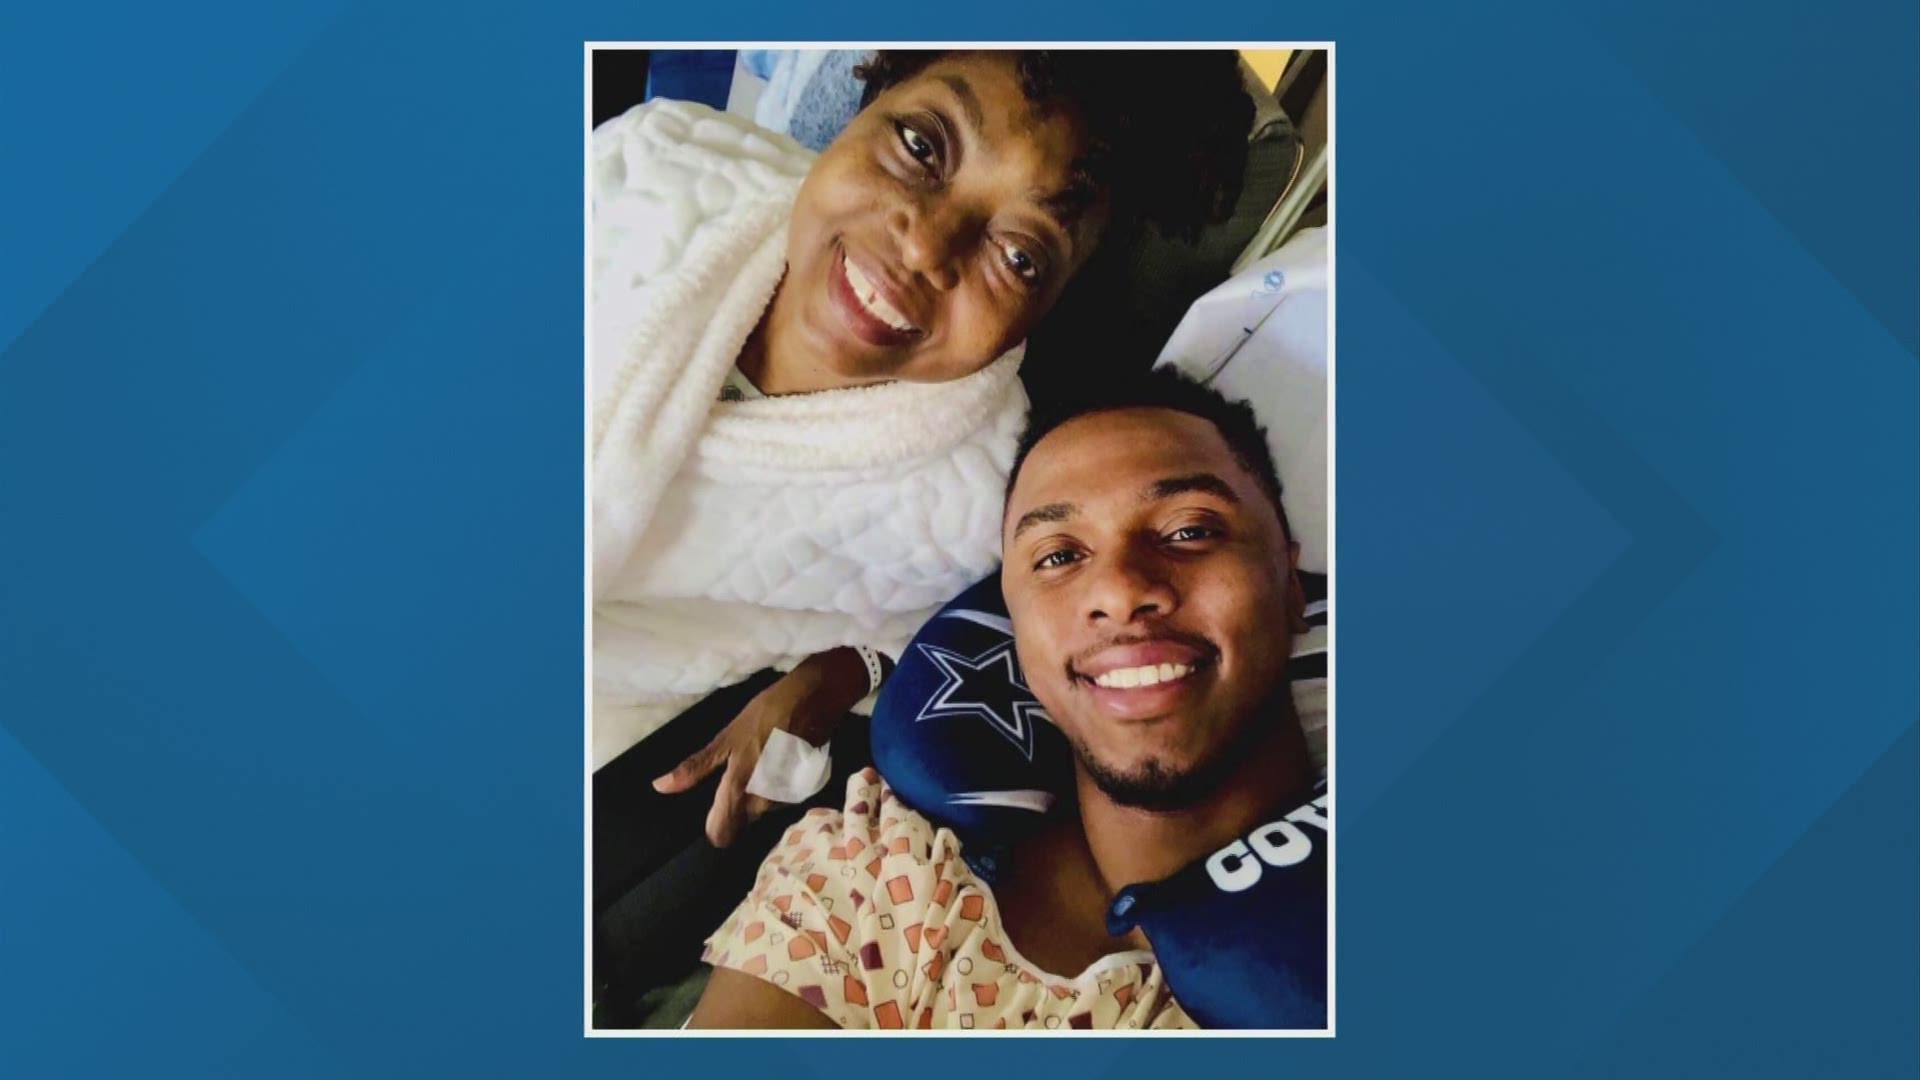 A local man donates a kidney to save his mom.